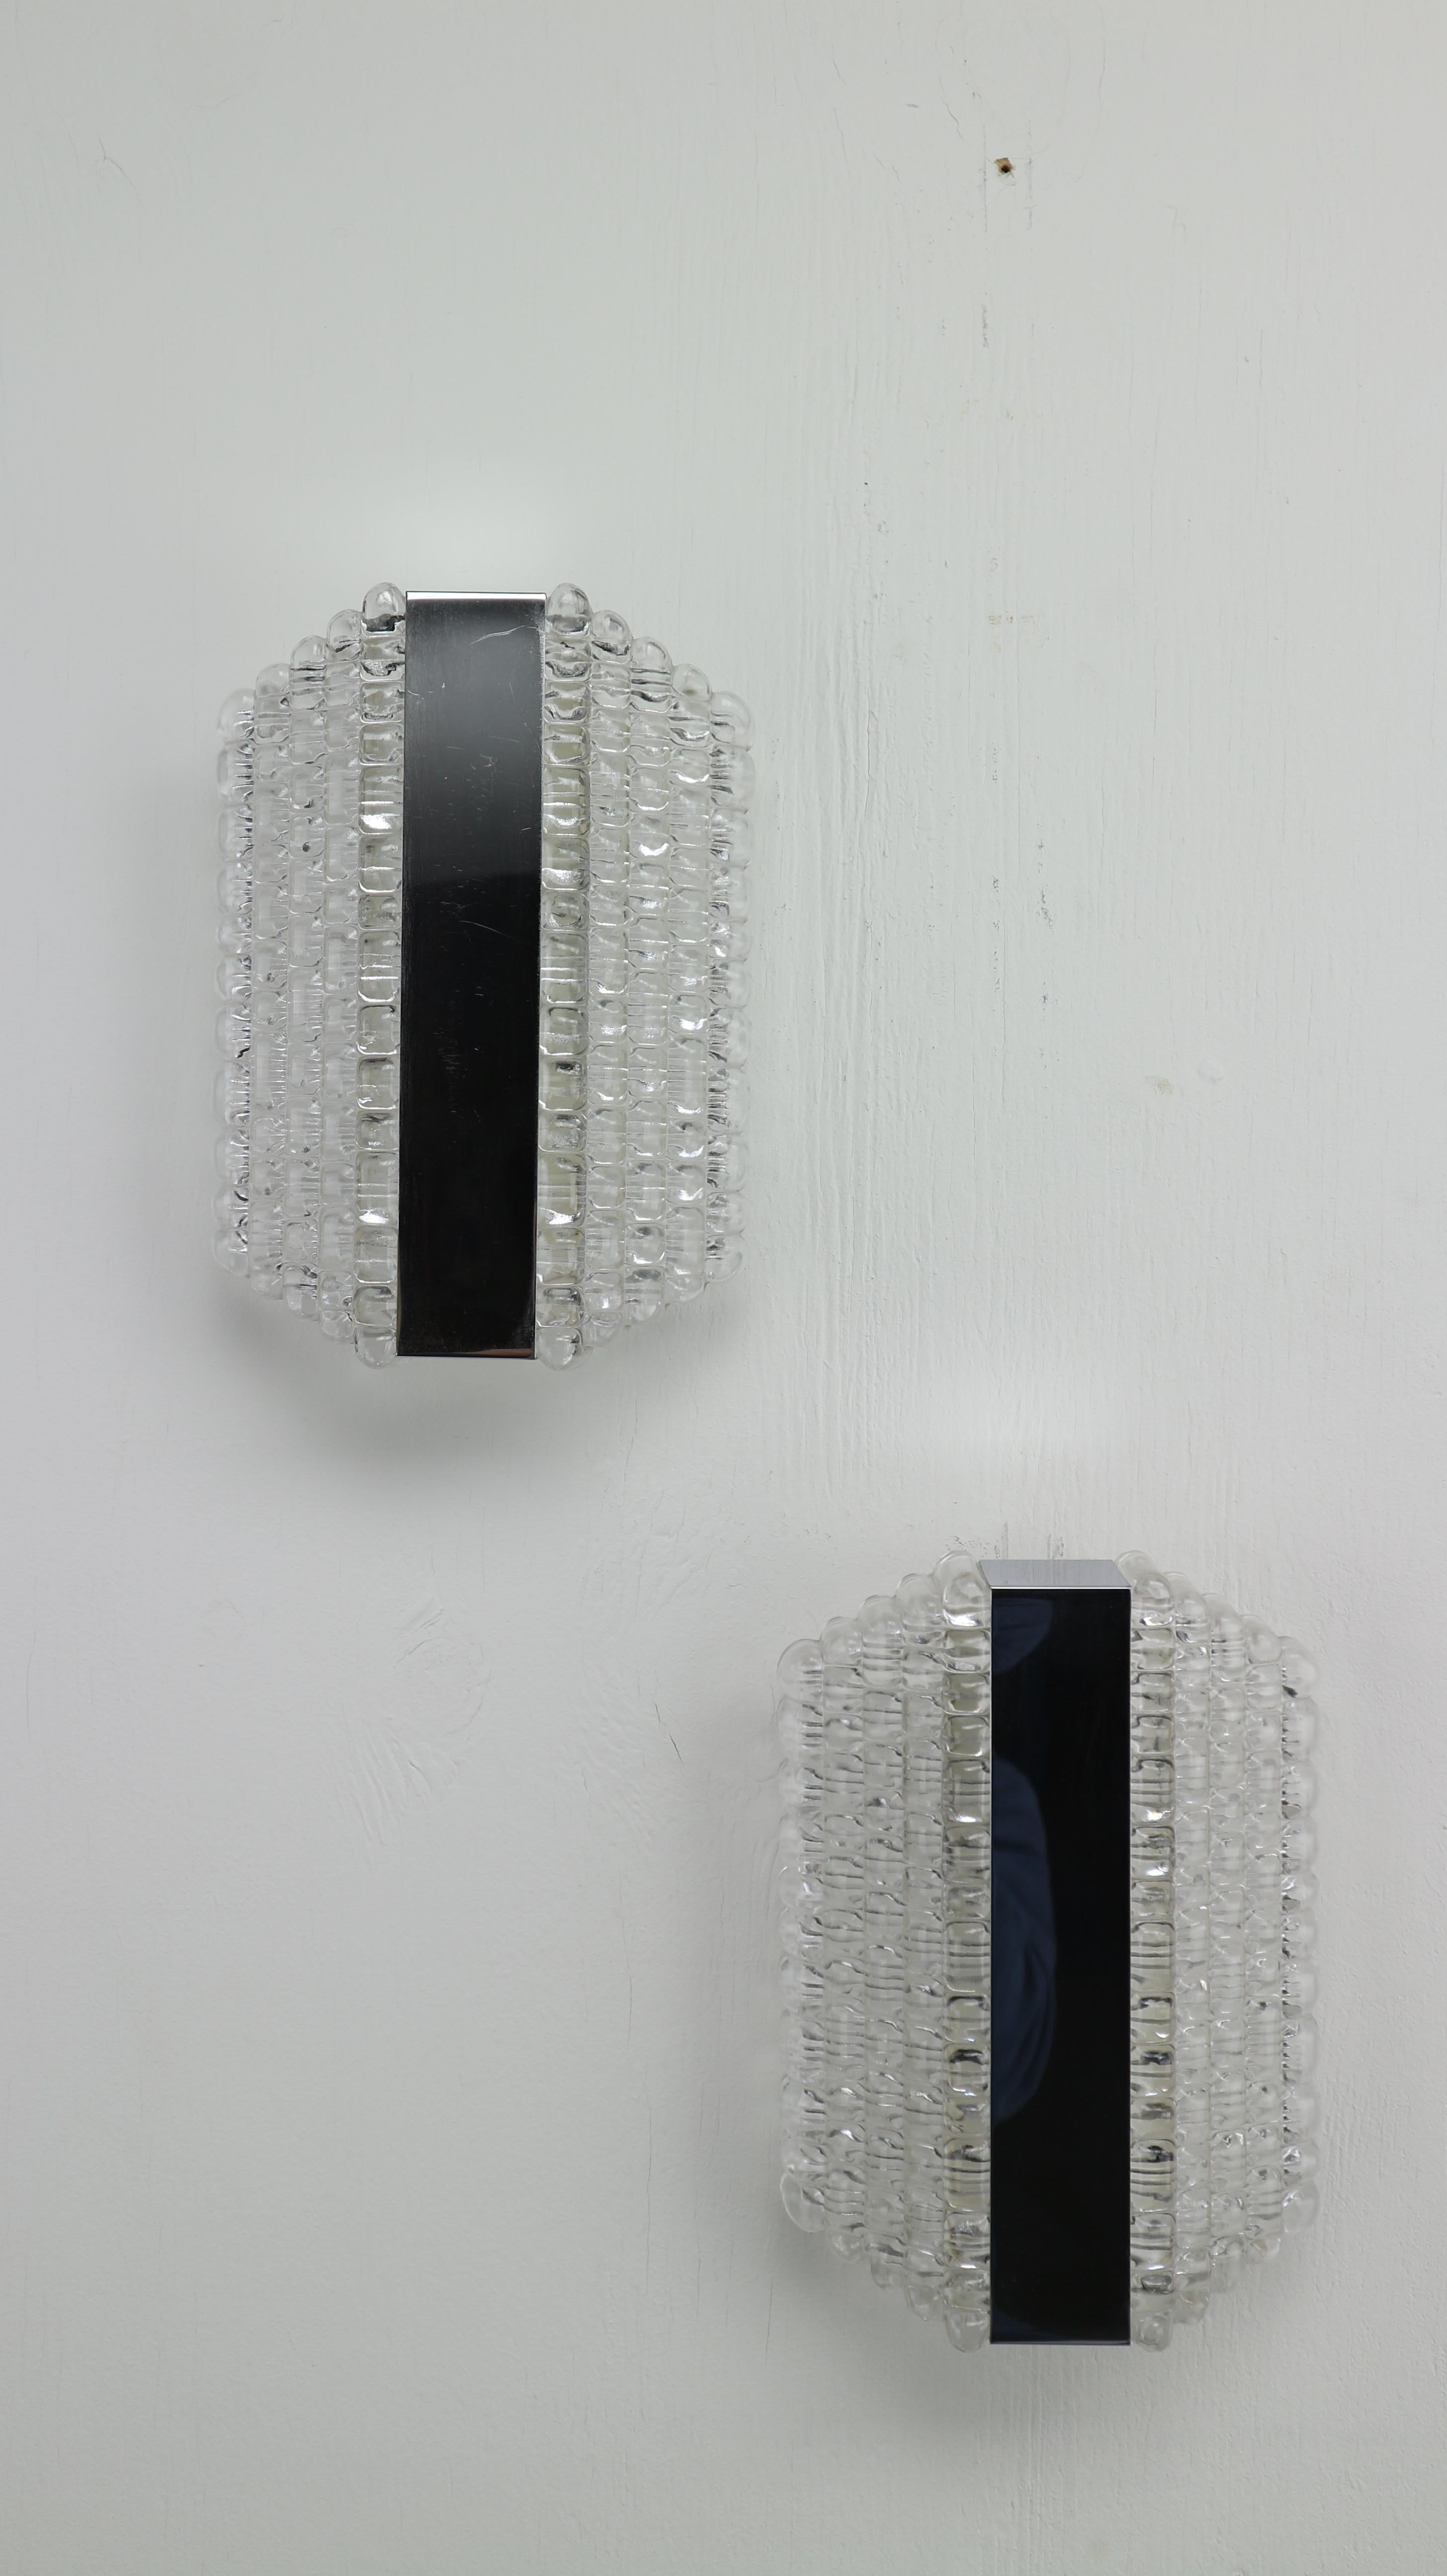 Set of two hanging wall lamps designed by Kaiser Leuchten in 1960s.
The peaces working in order and gives a warm lightening.
Chrome plating mirror details and crystal glass.